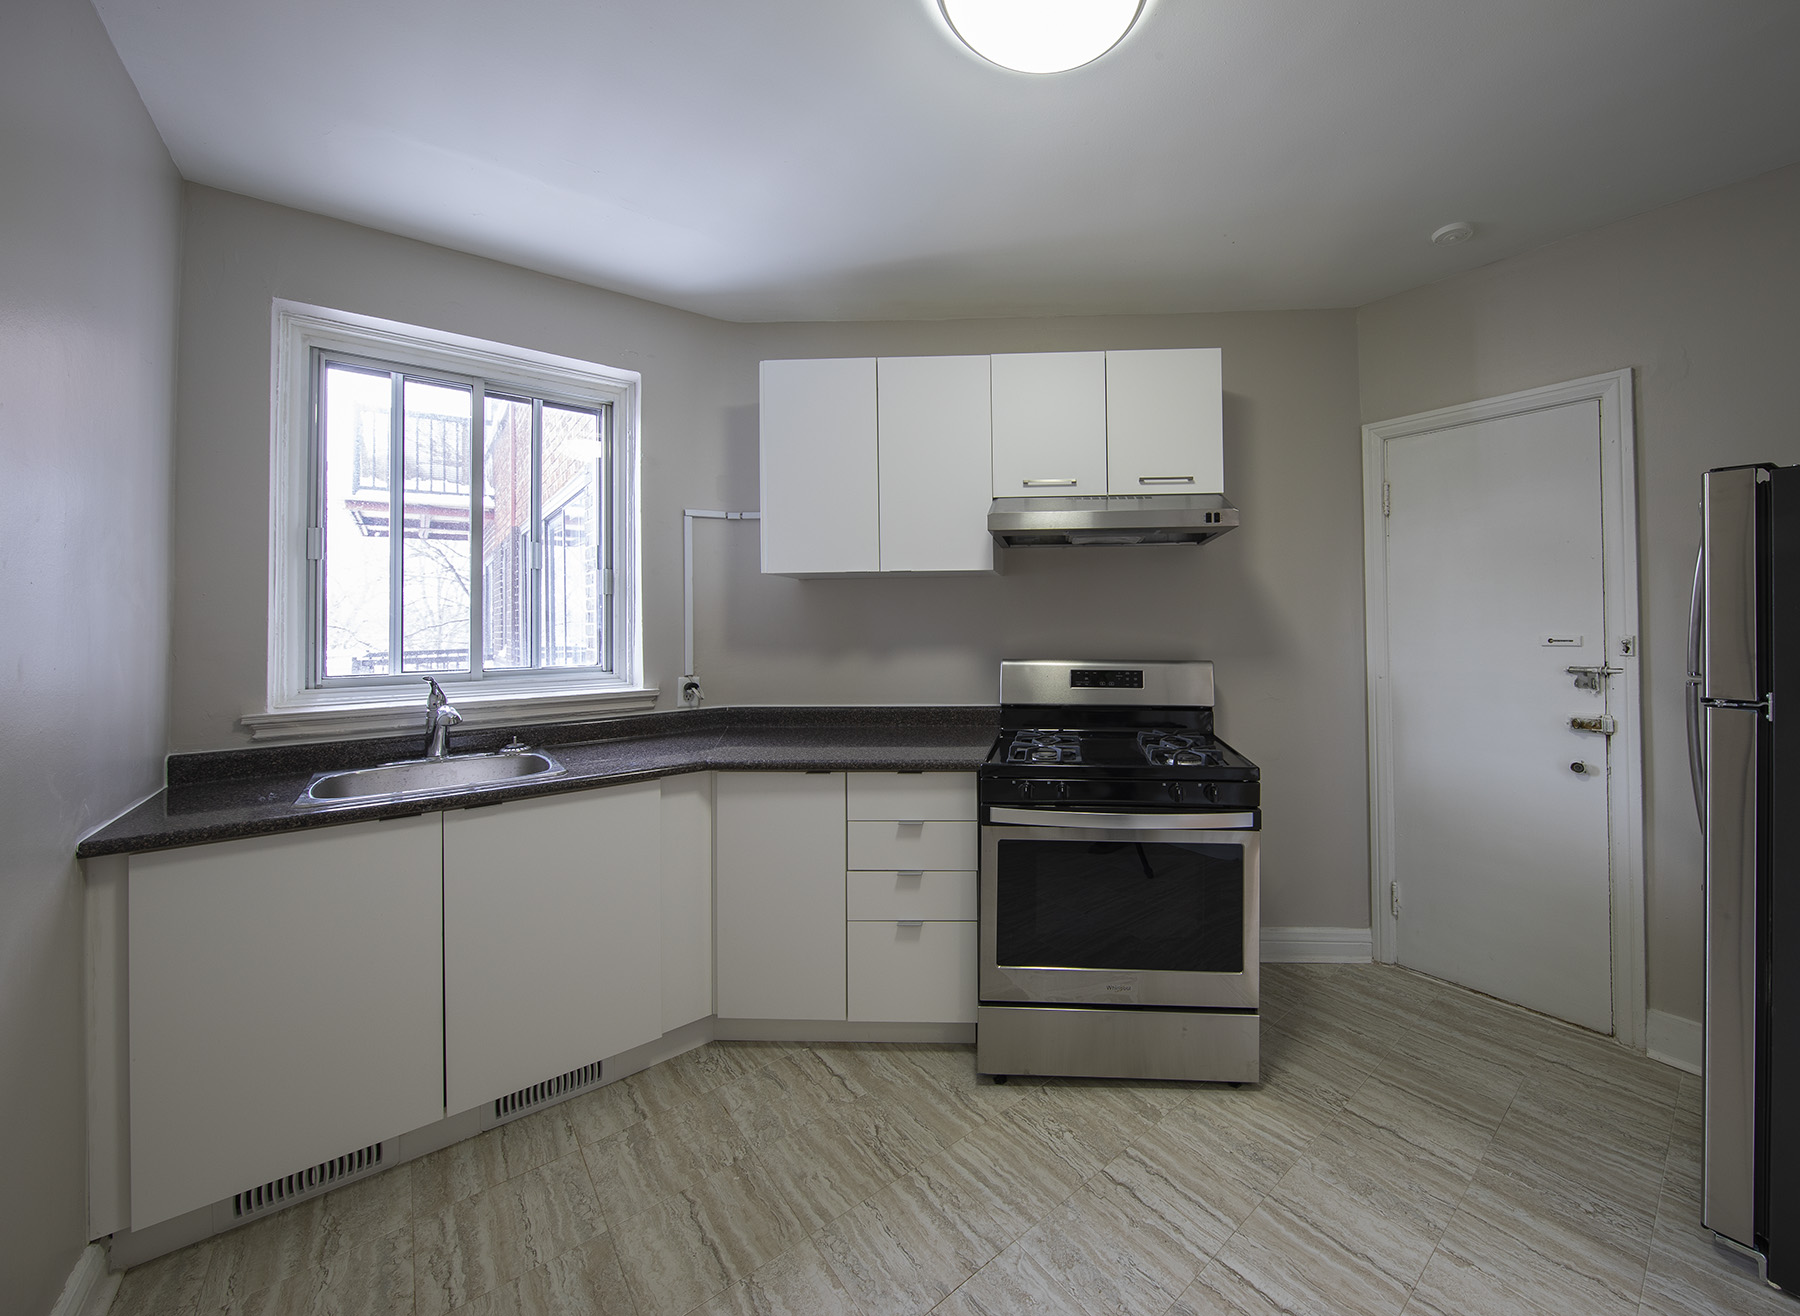 2 bedroom Apartments for rent in Notre-Dame-de-Grace at 6325 Somerled - Photo 10 - RentQuebecApartments – L401540